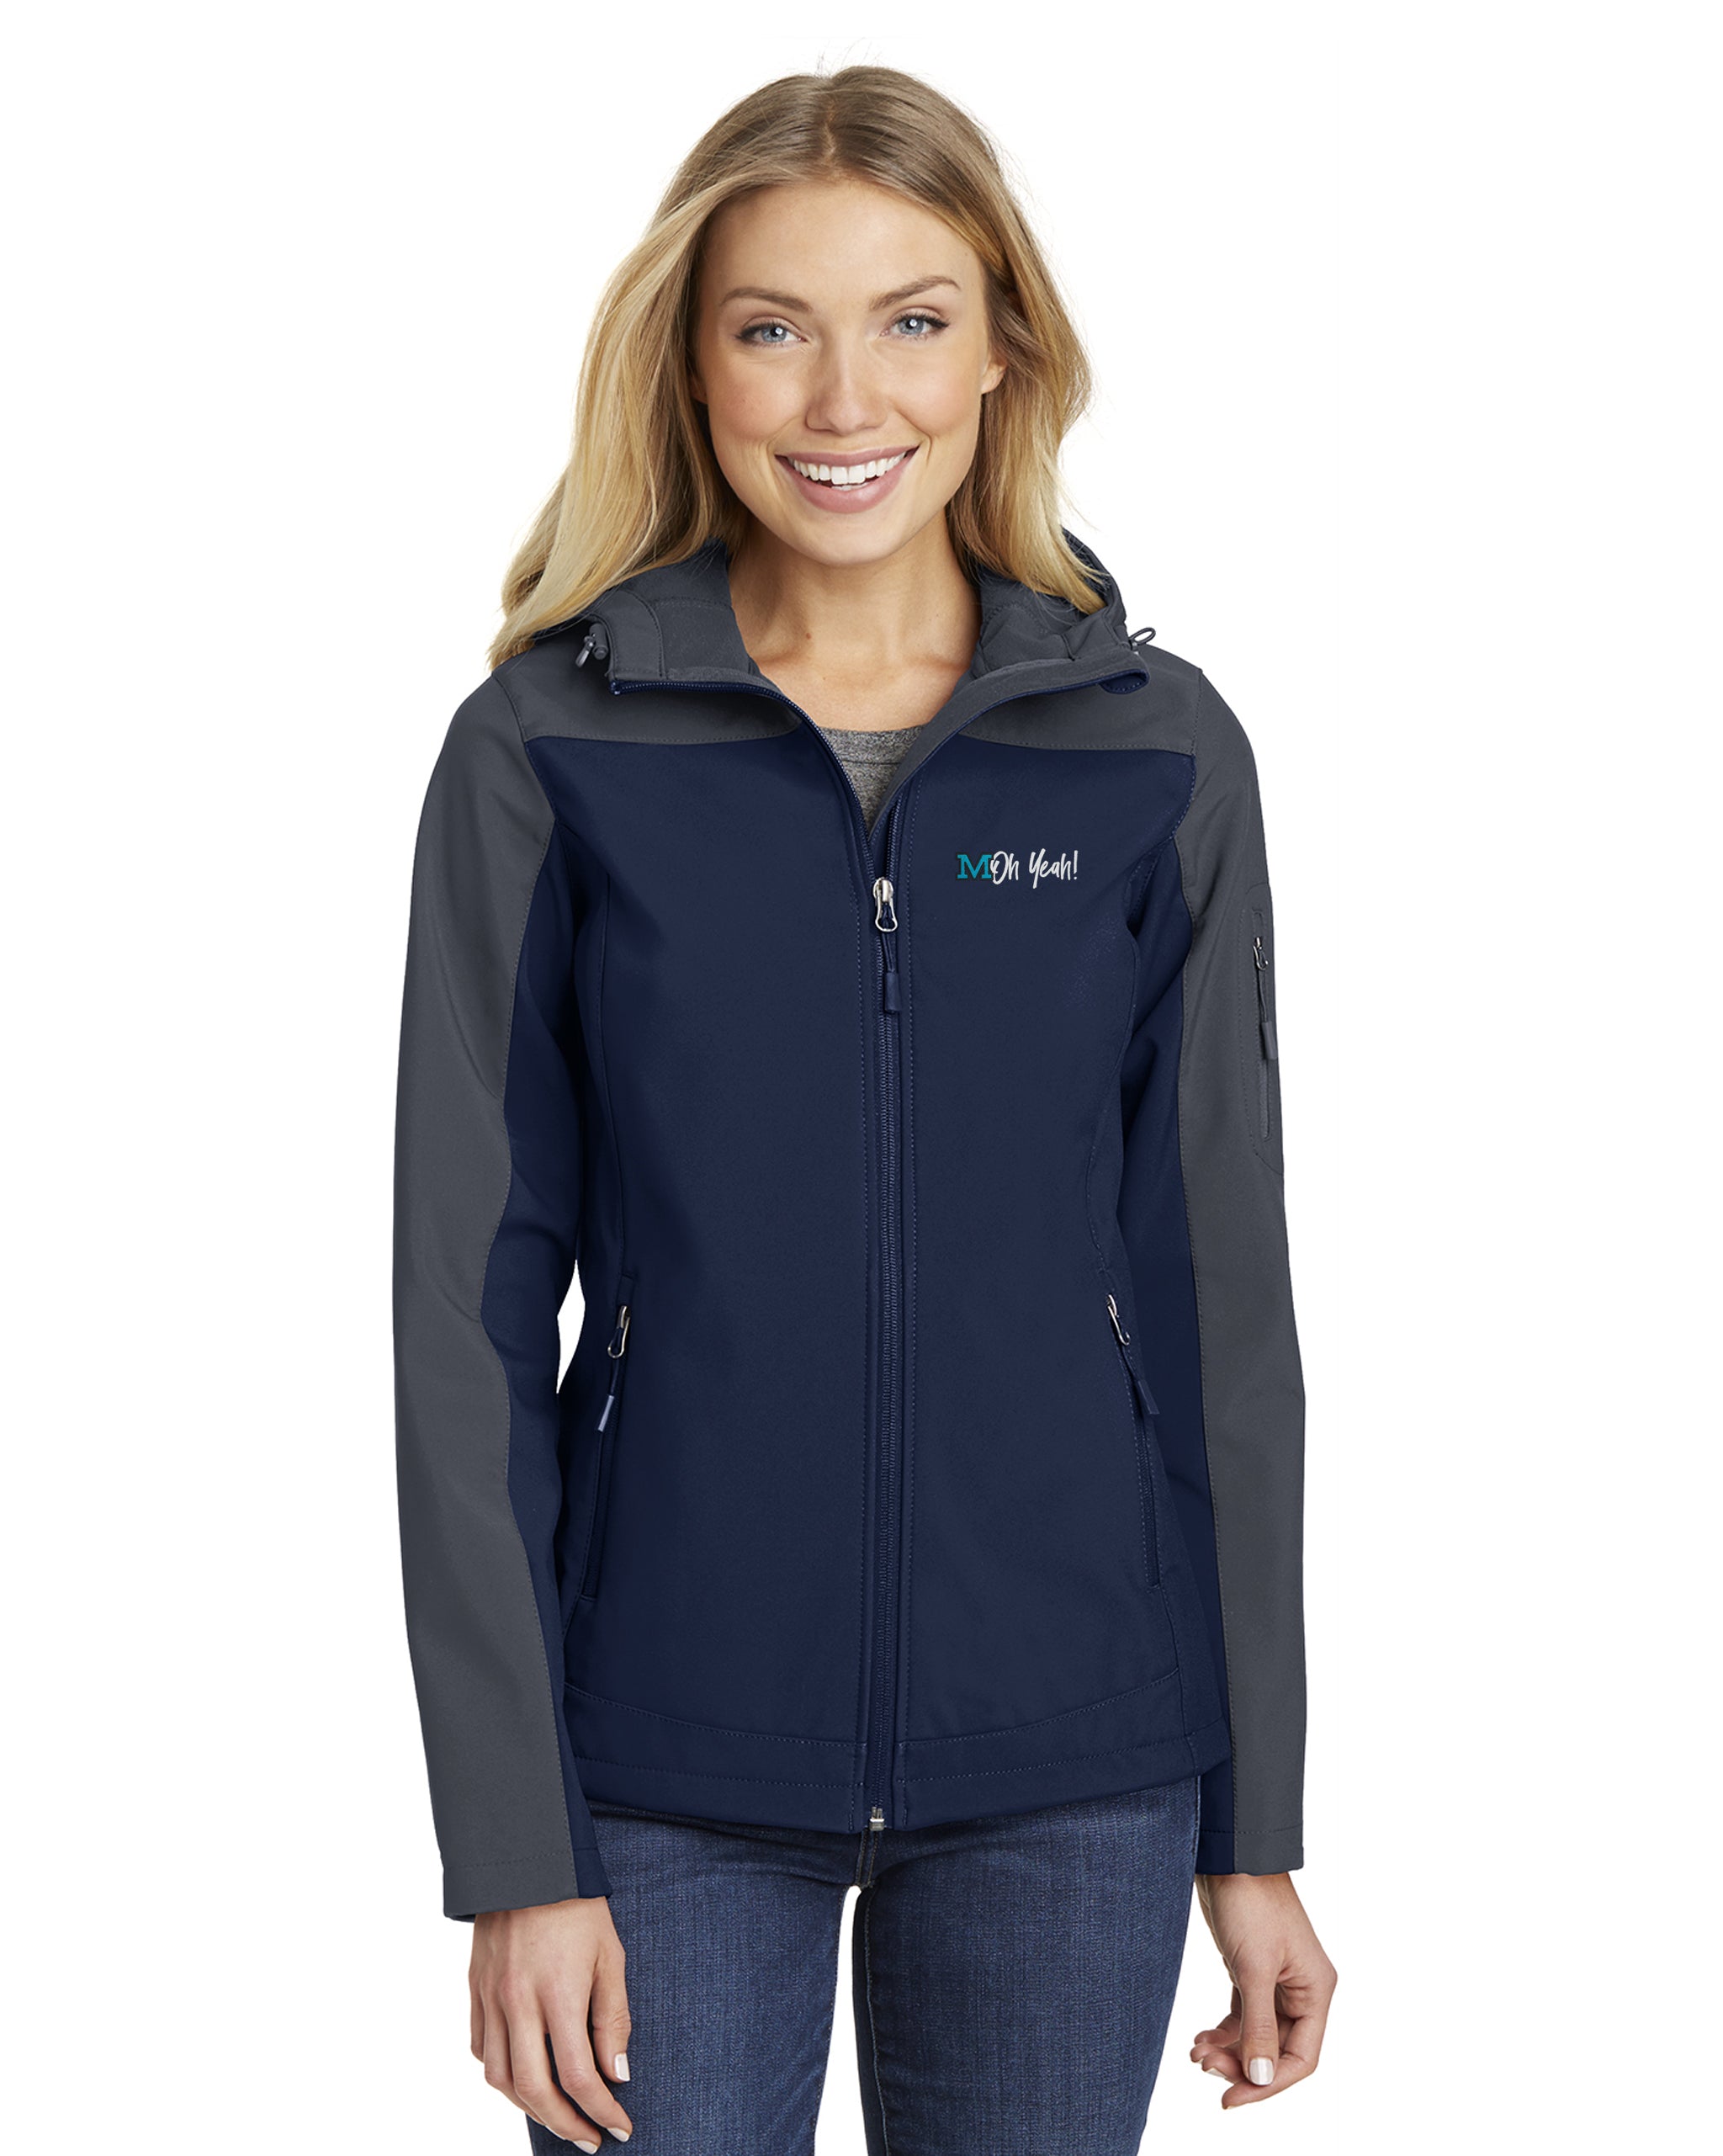 MOh Yeah - Port Authority Ladies Hooded Core Soft Shell Jacket - L335